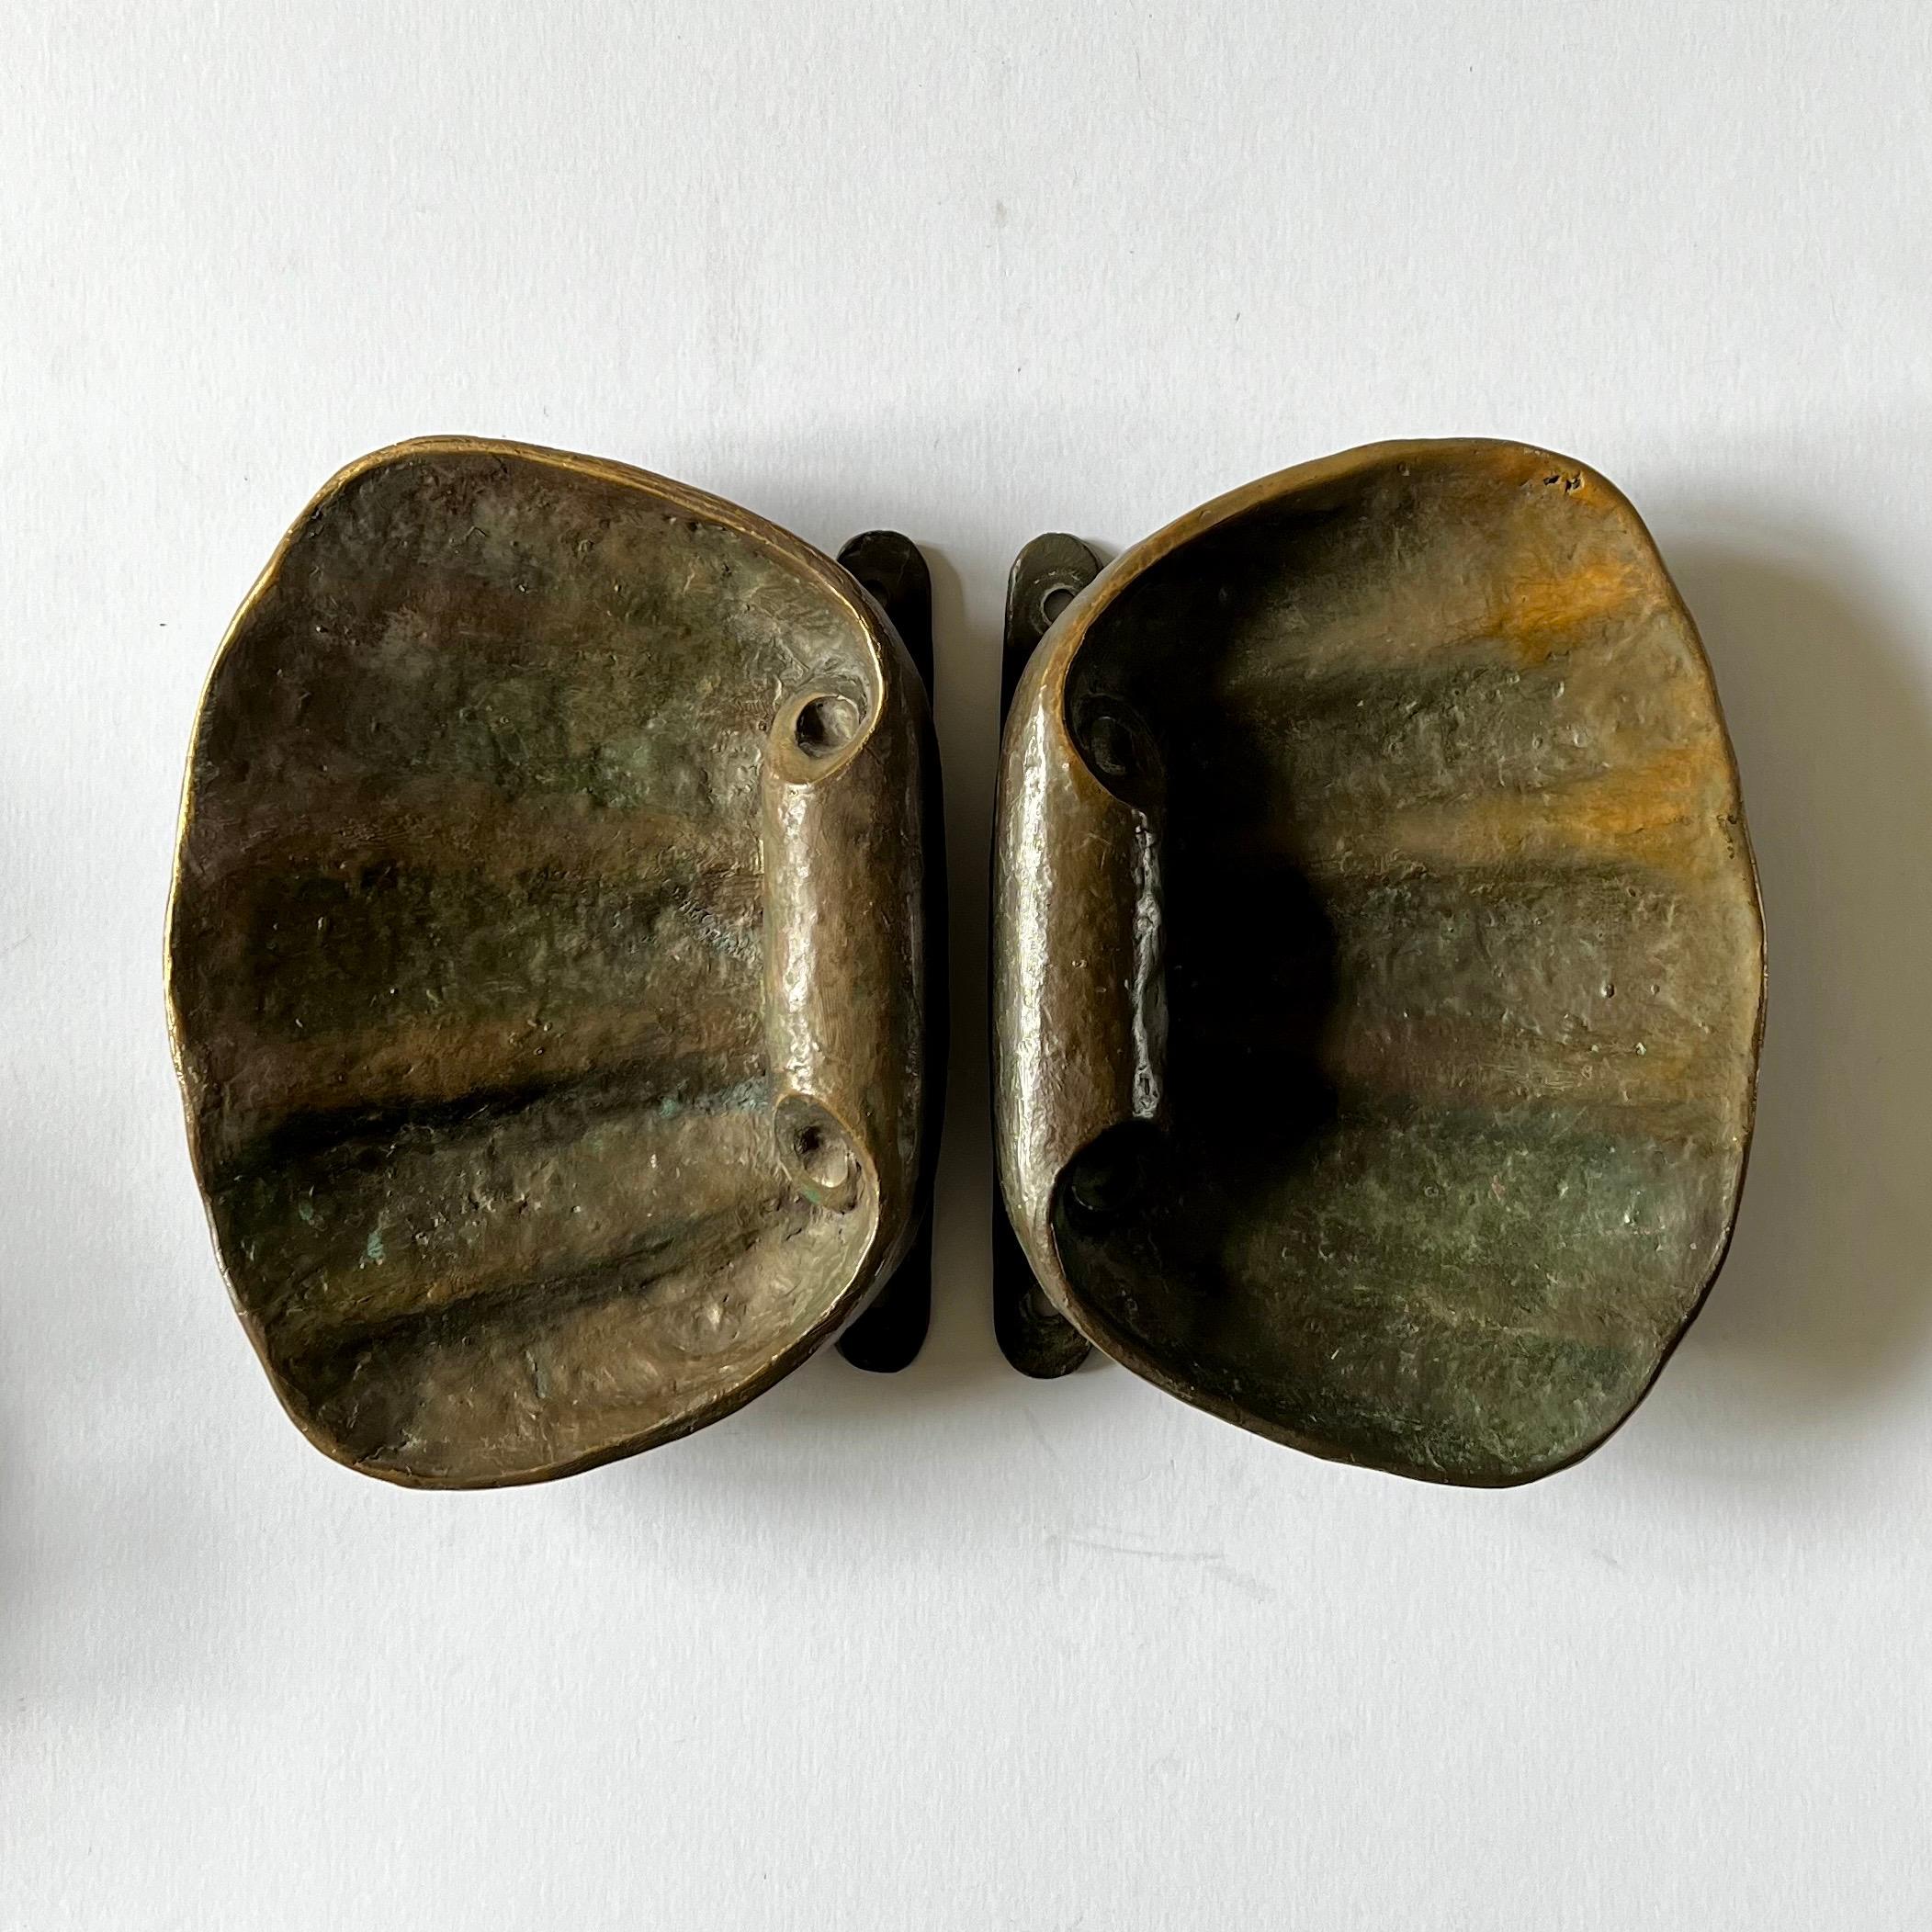 A set of two very large bronze door handles in the shape of seashells. 20th century, European.

The handles are impressive pieces, each of the same organic design, which can be turned to use on the left or right as required. Cast to include the